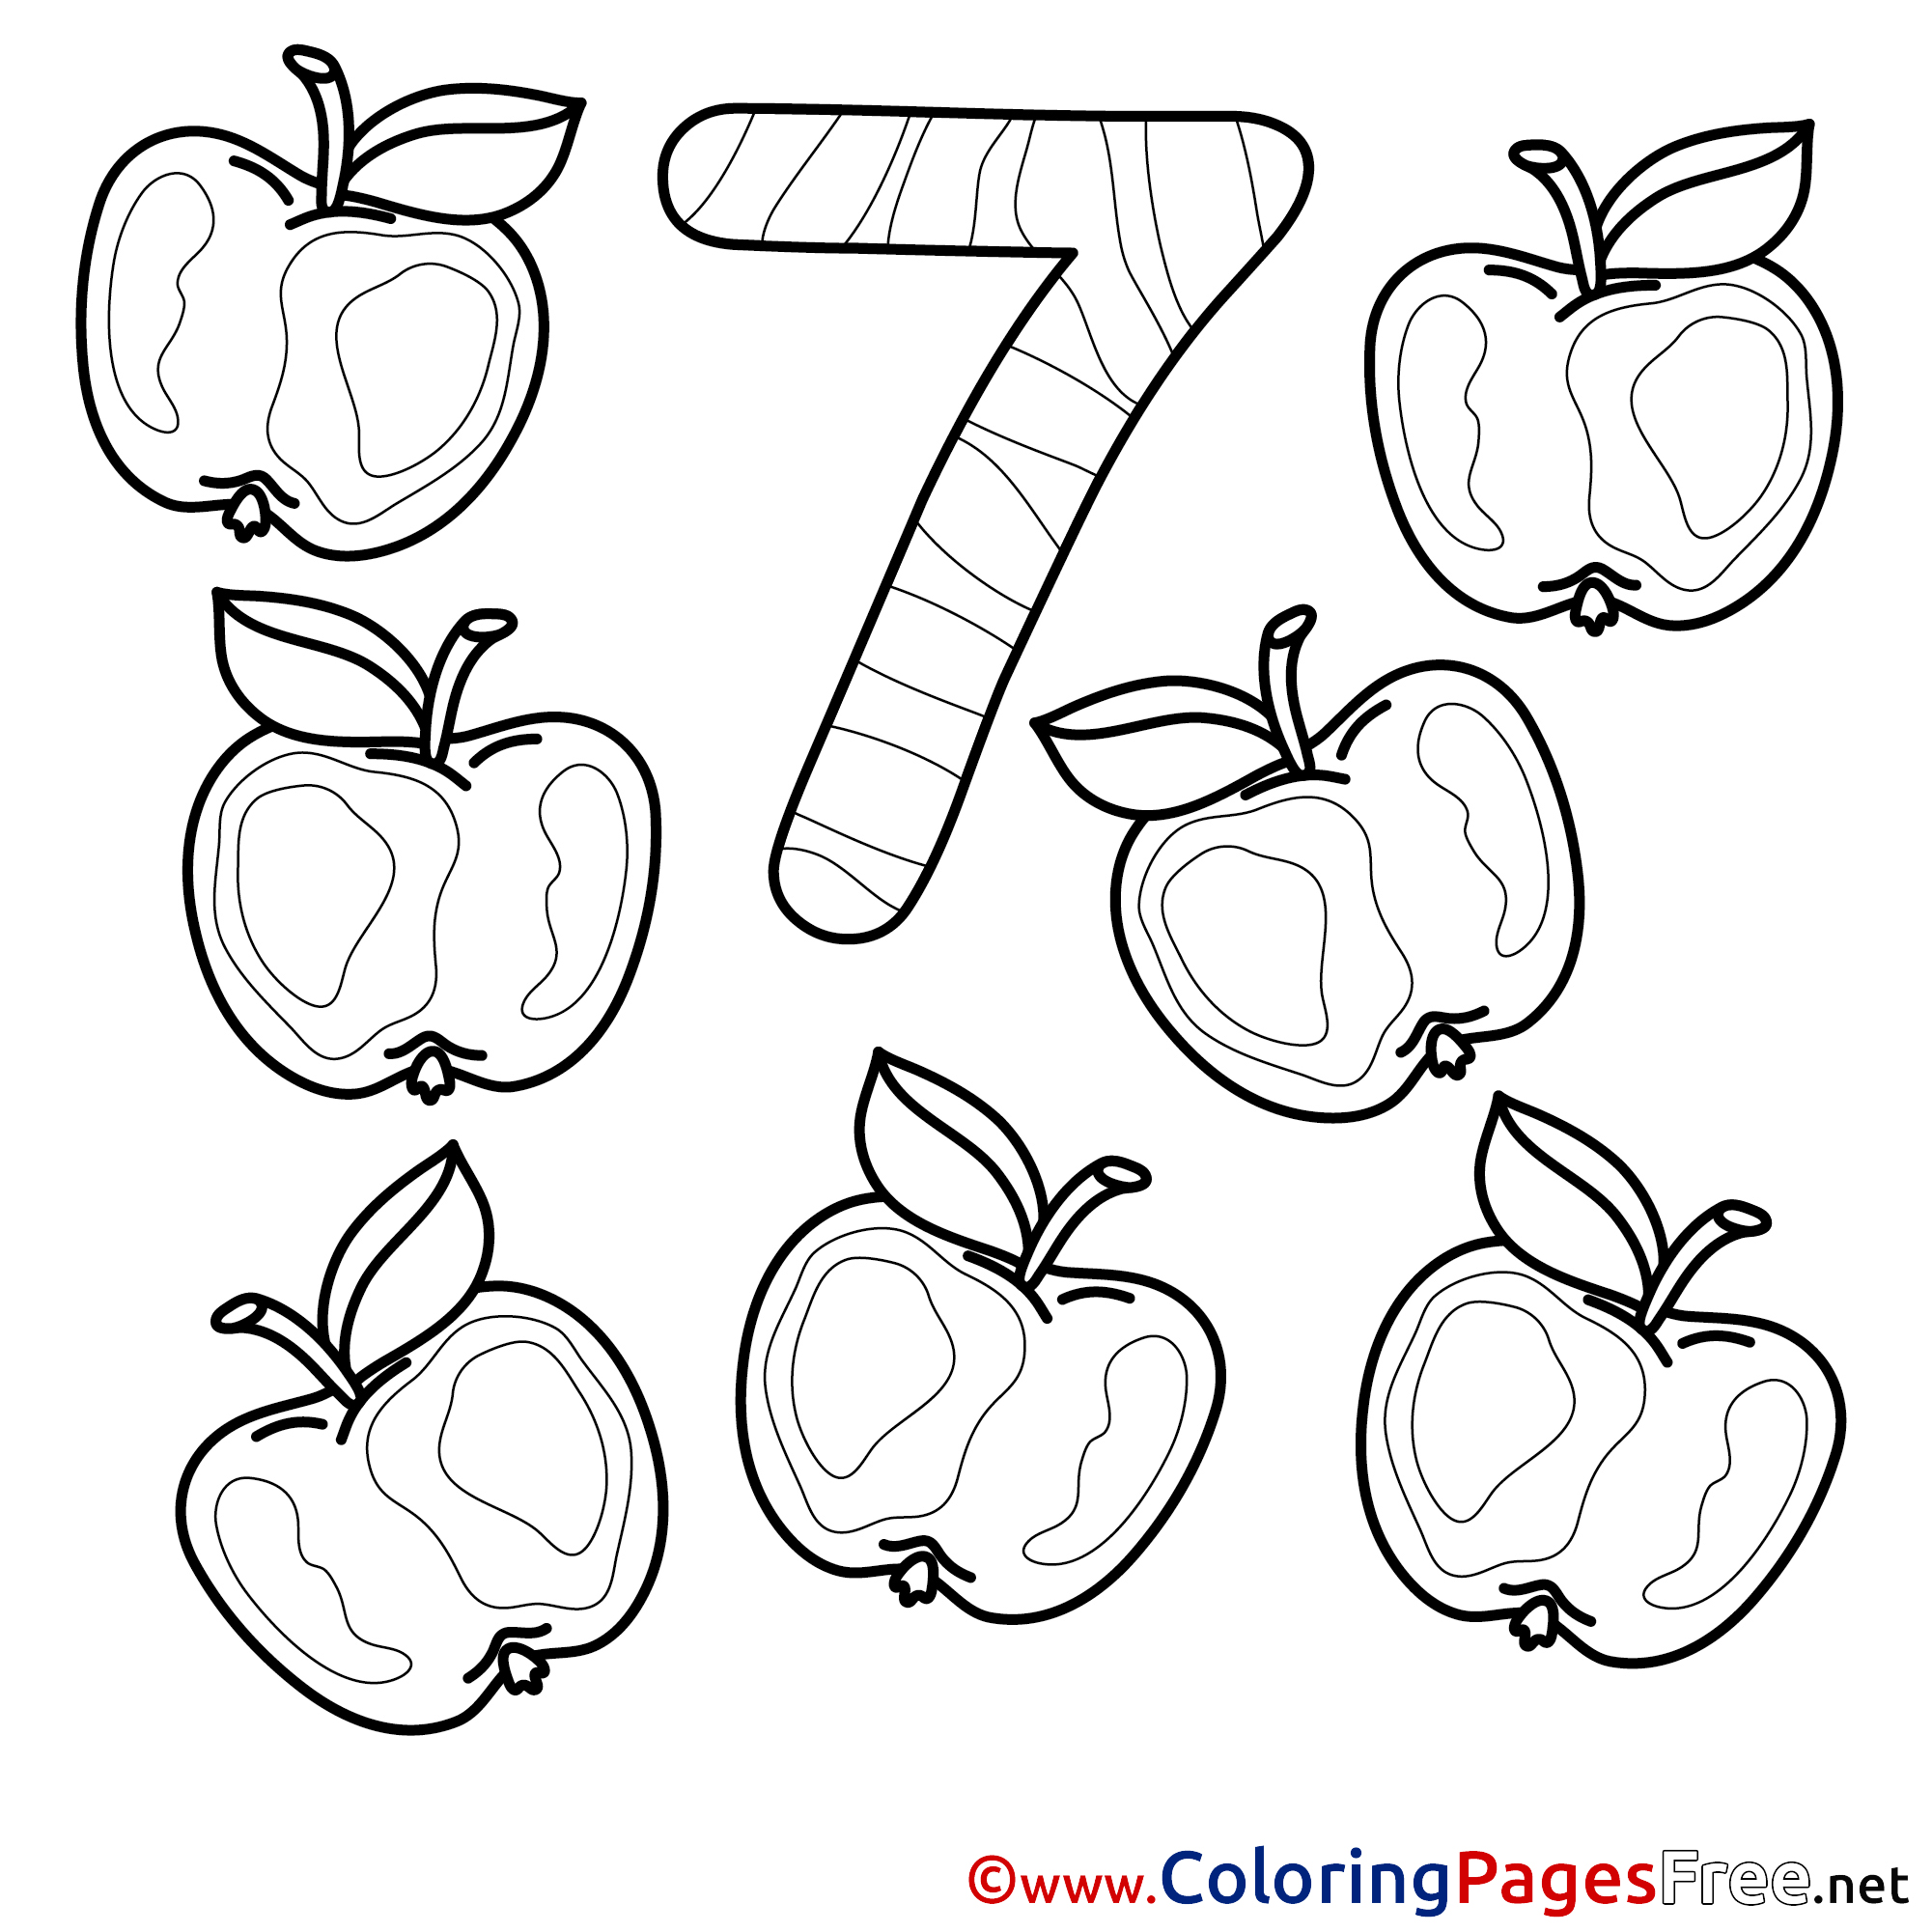 Number 7 Coloring Page at GetDrawings | Free download